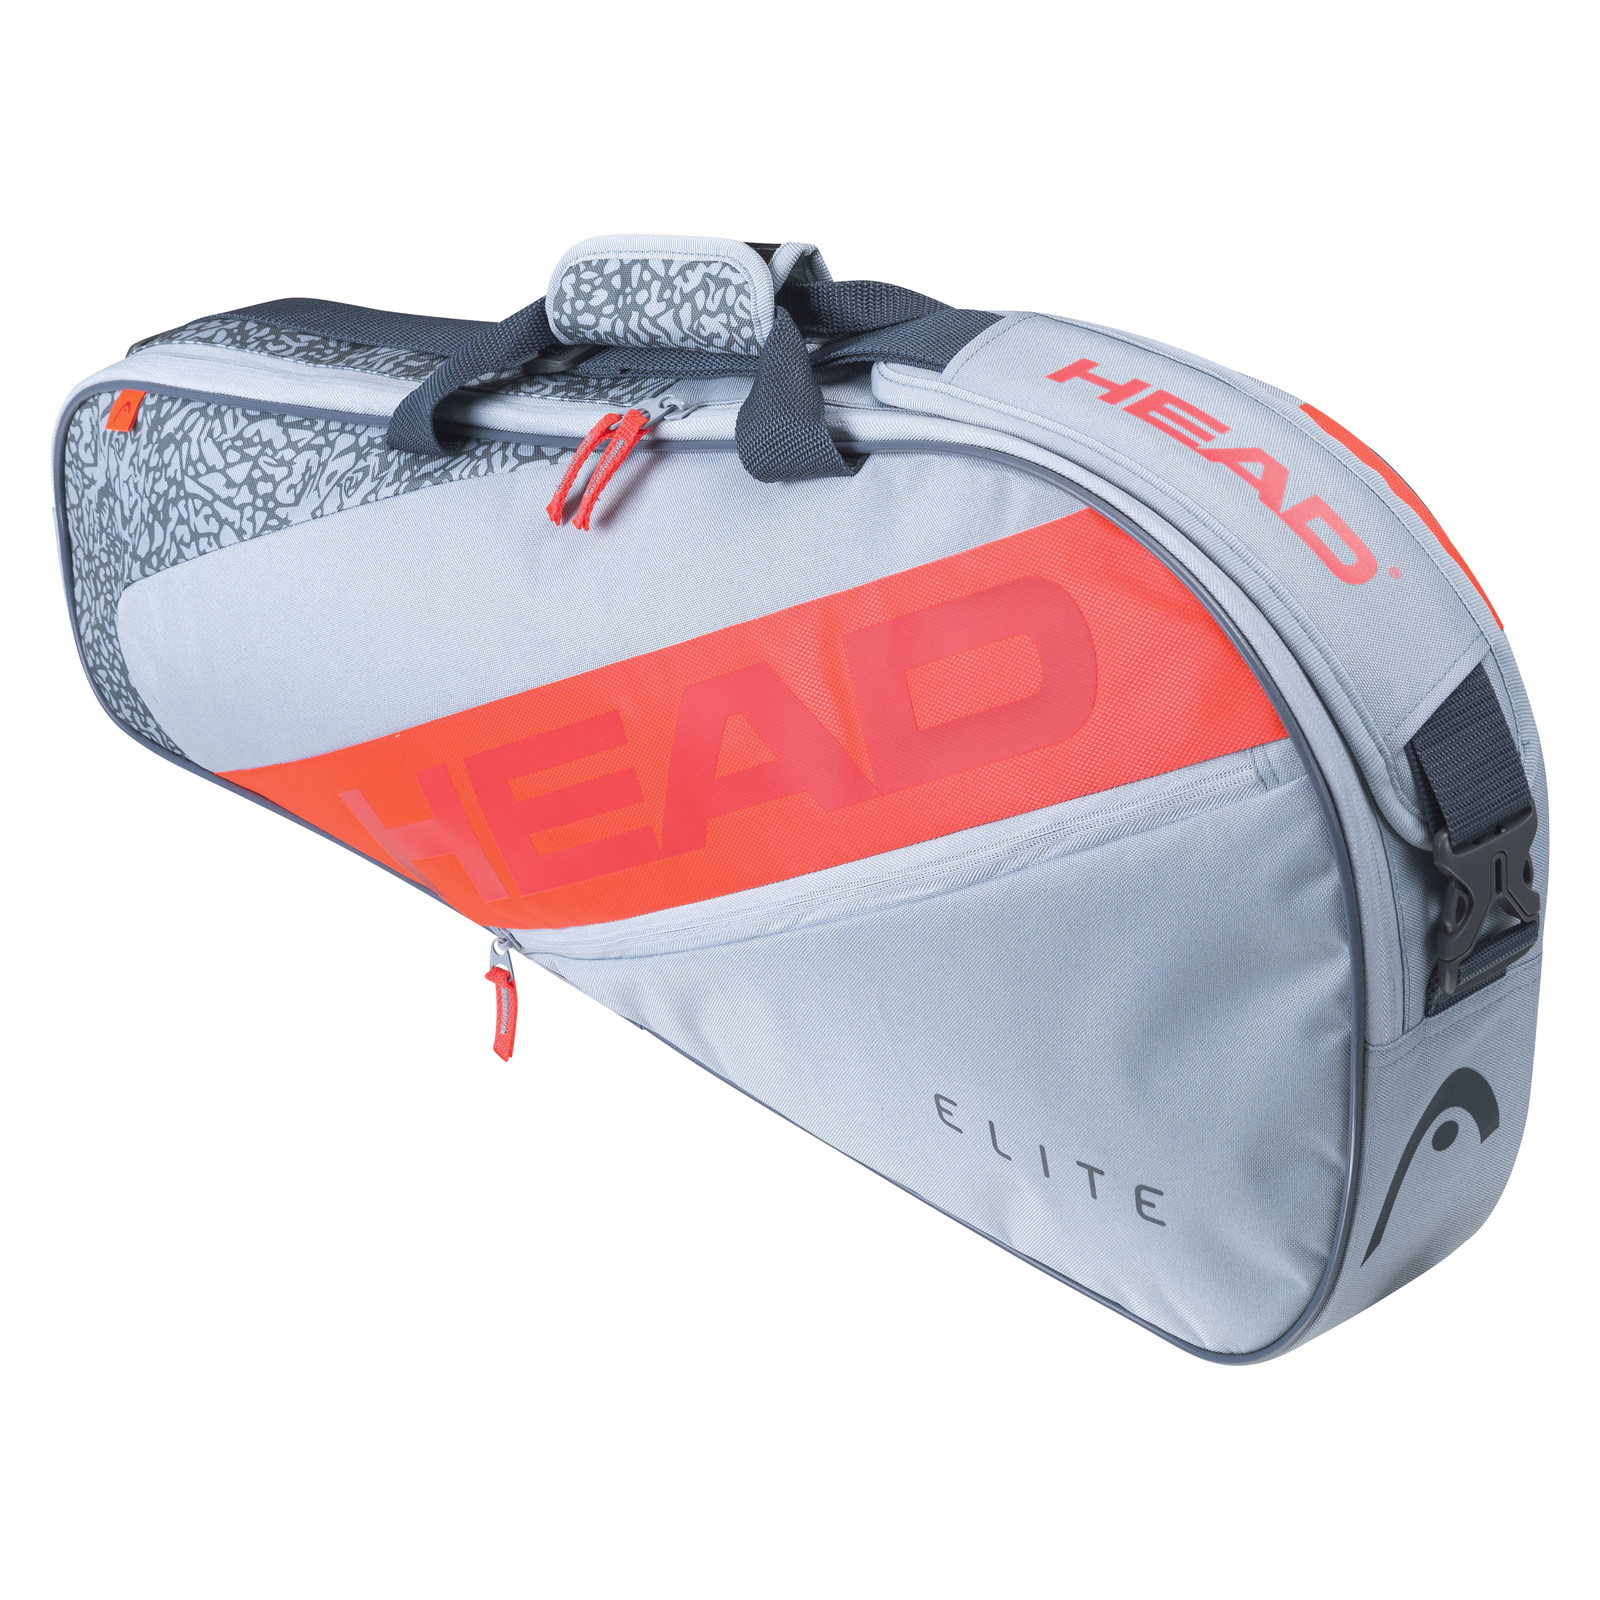 Take a Closer look at the Head Gravity Sport Tennis Bag - YouTube